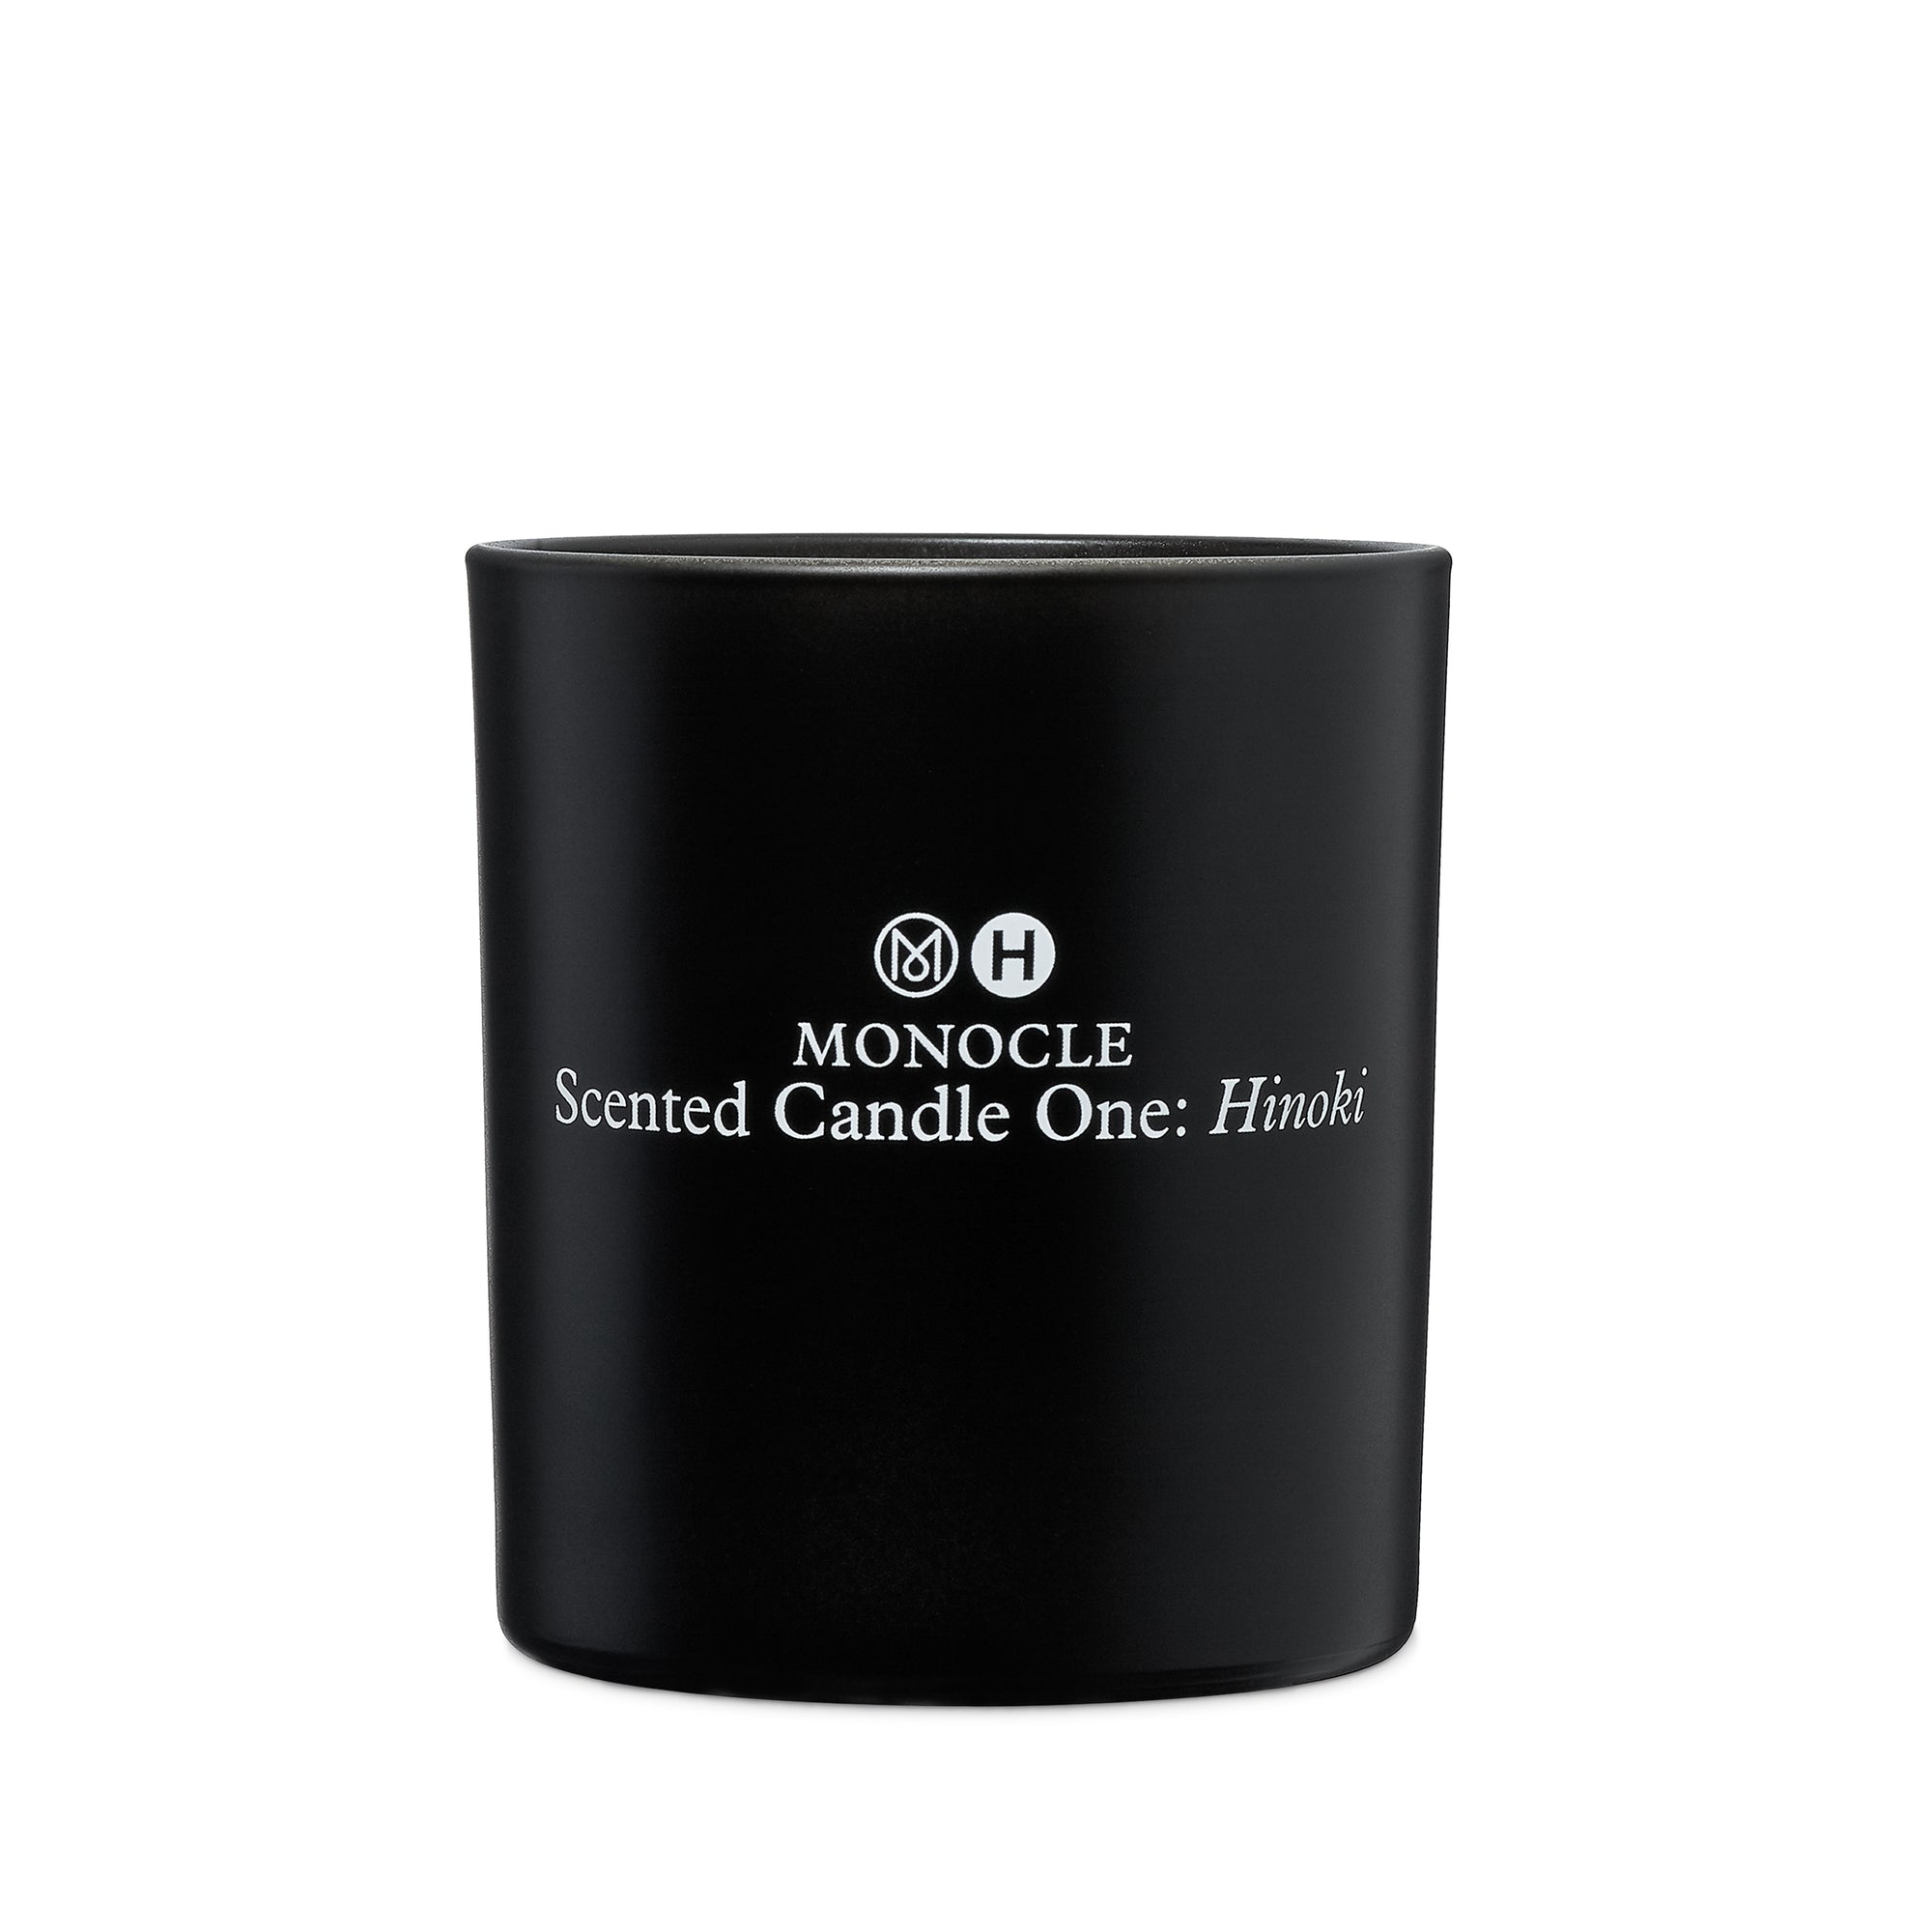 CDG Parfum - Monocle Scented Candle One: Hinoki - (165g) view 1